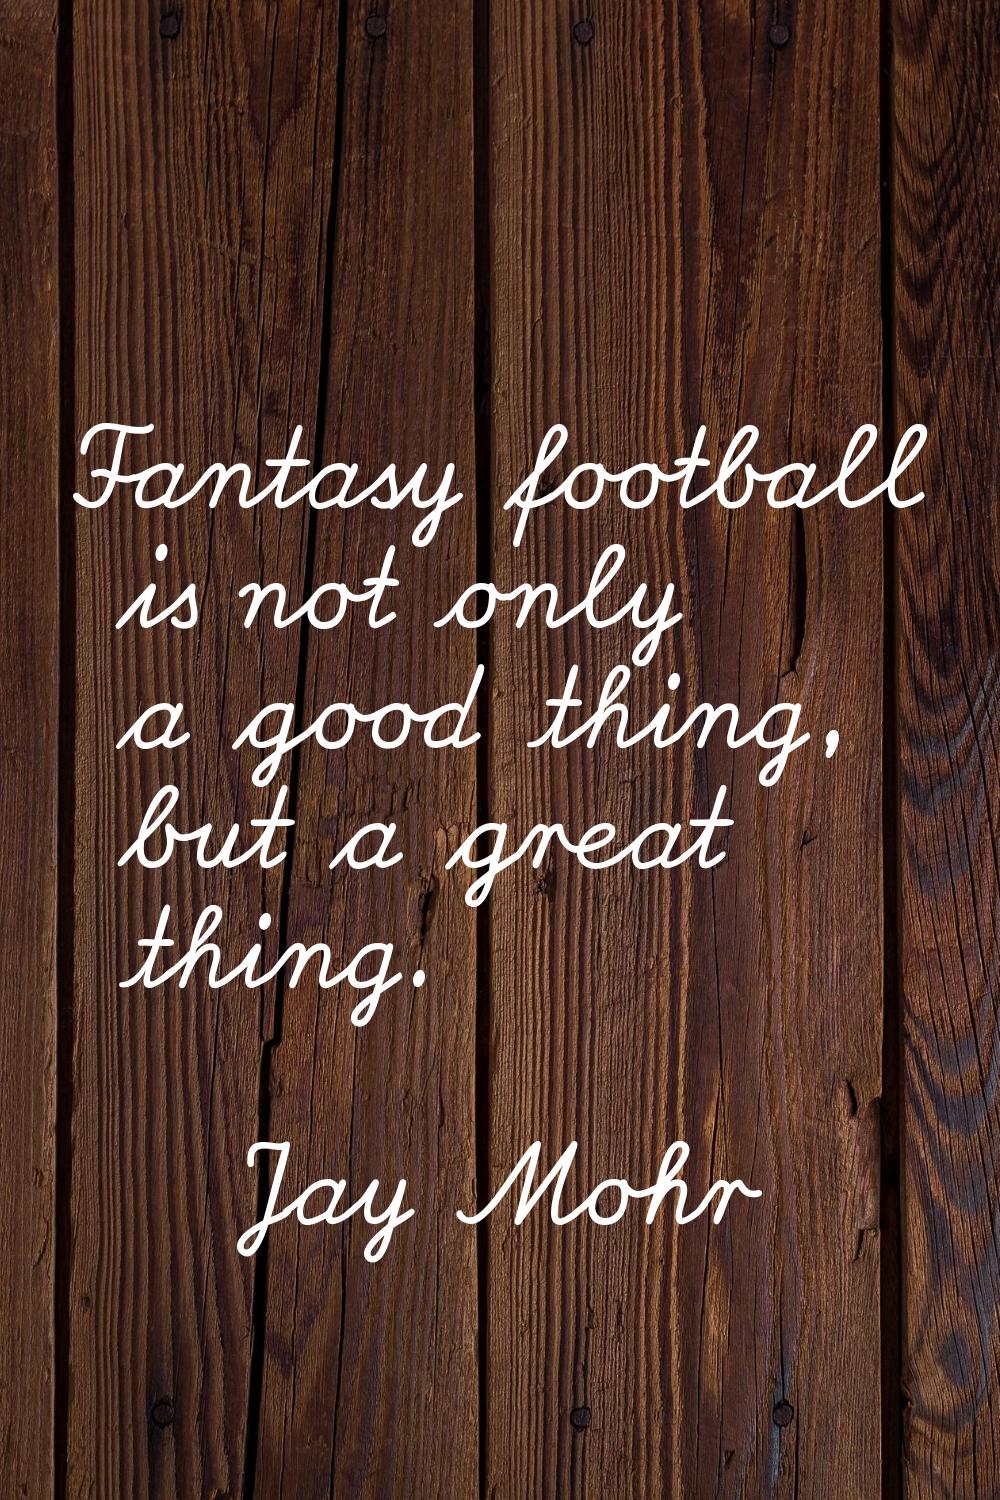 Fantasy football is not only a good thing, but a great thing.